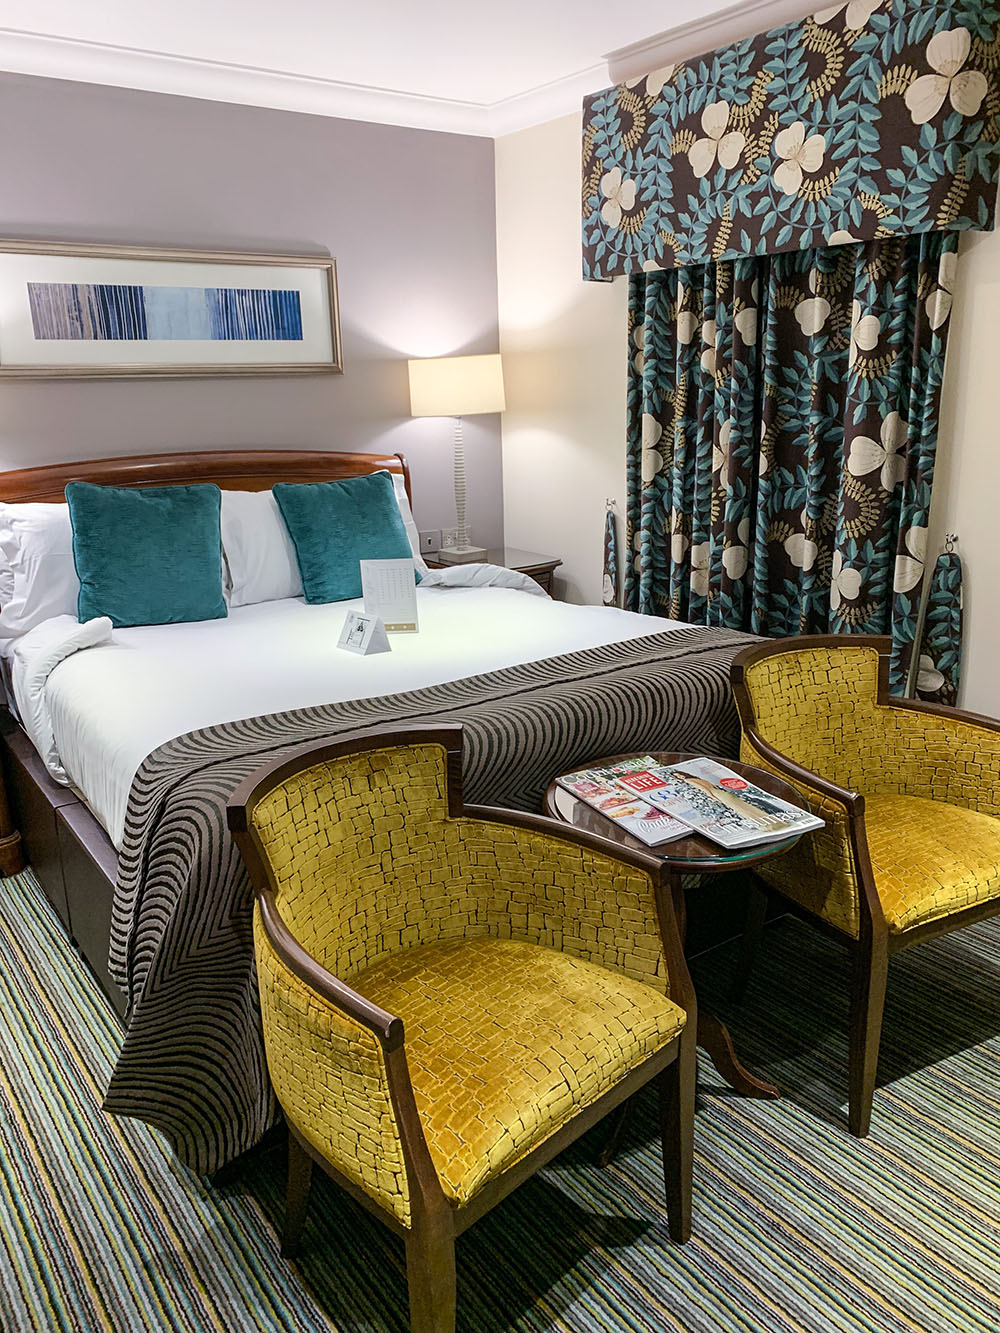 where-to-stay-near-windsor-castle-at-christmas-sir-christopher-wren